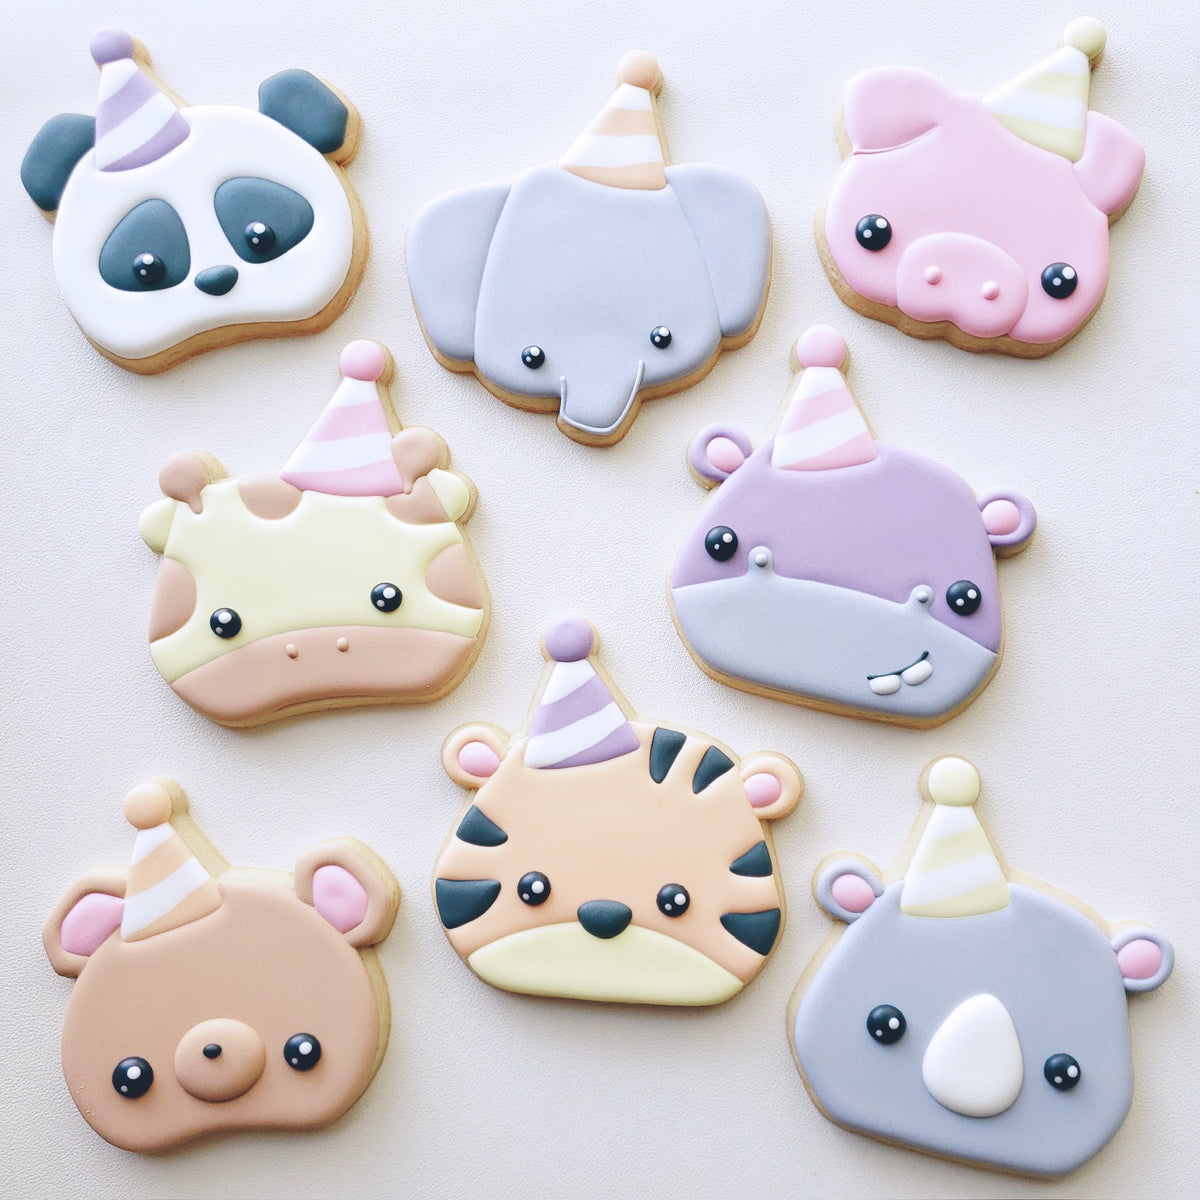 Paper Street Parlour Party Animal Cookie Cutter Class Set